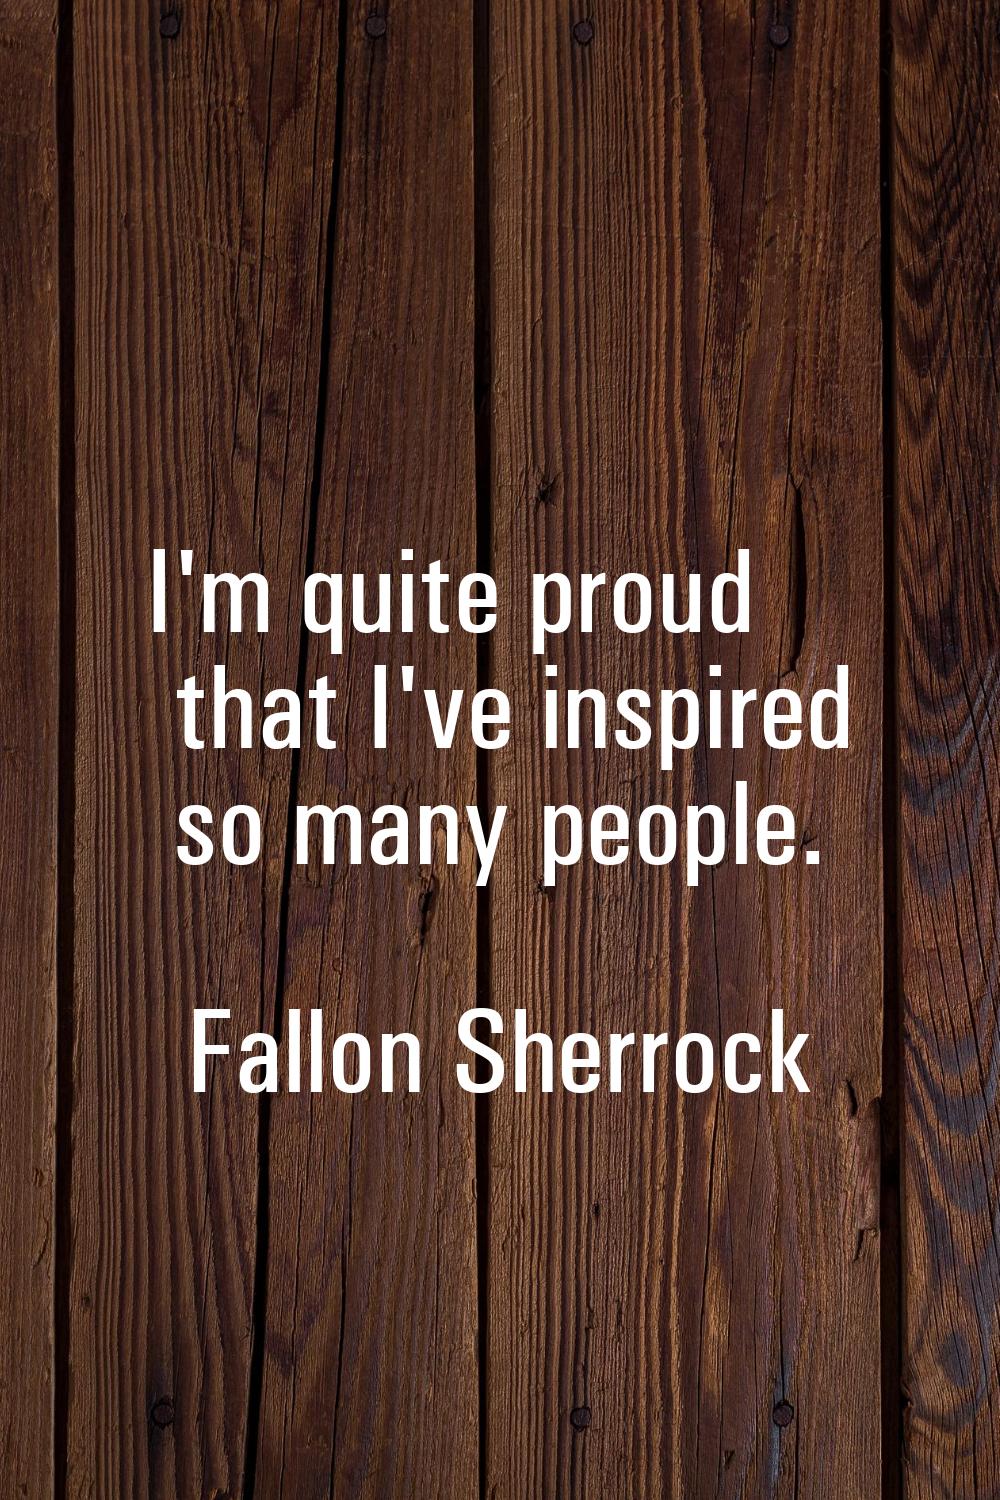 I'm quite proud that I've inspired so many people.